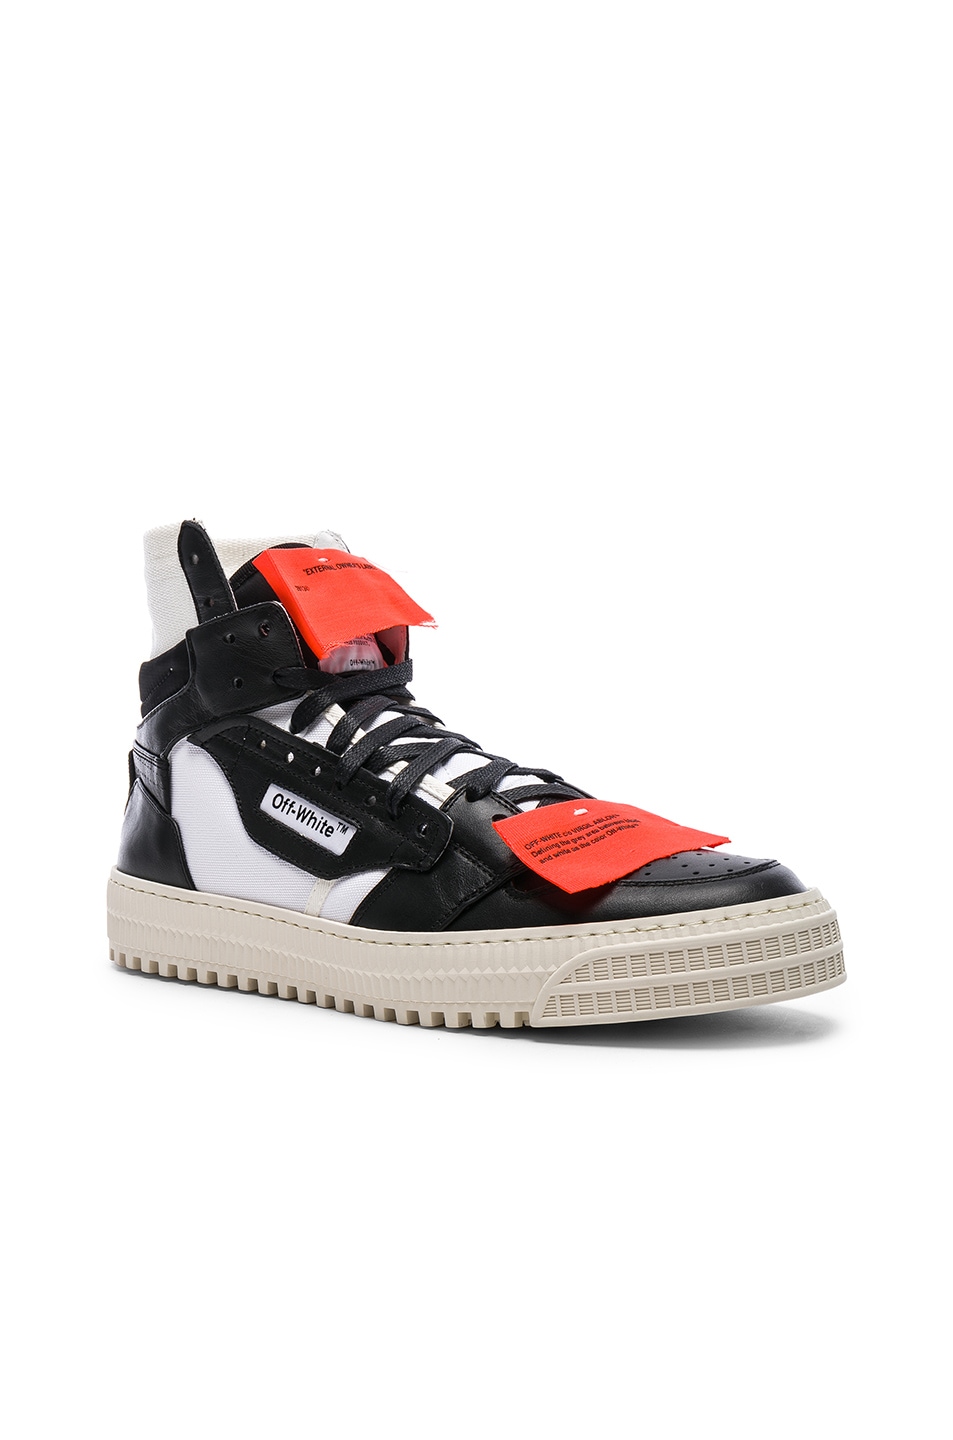 OFF-WHITE BLACK & WHITE LOW 3.0 HIGH-TOP SNEAKERS | ModeSens